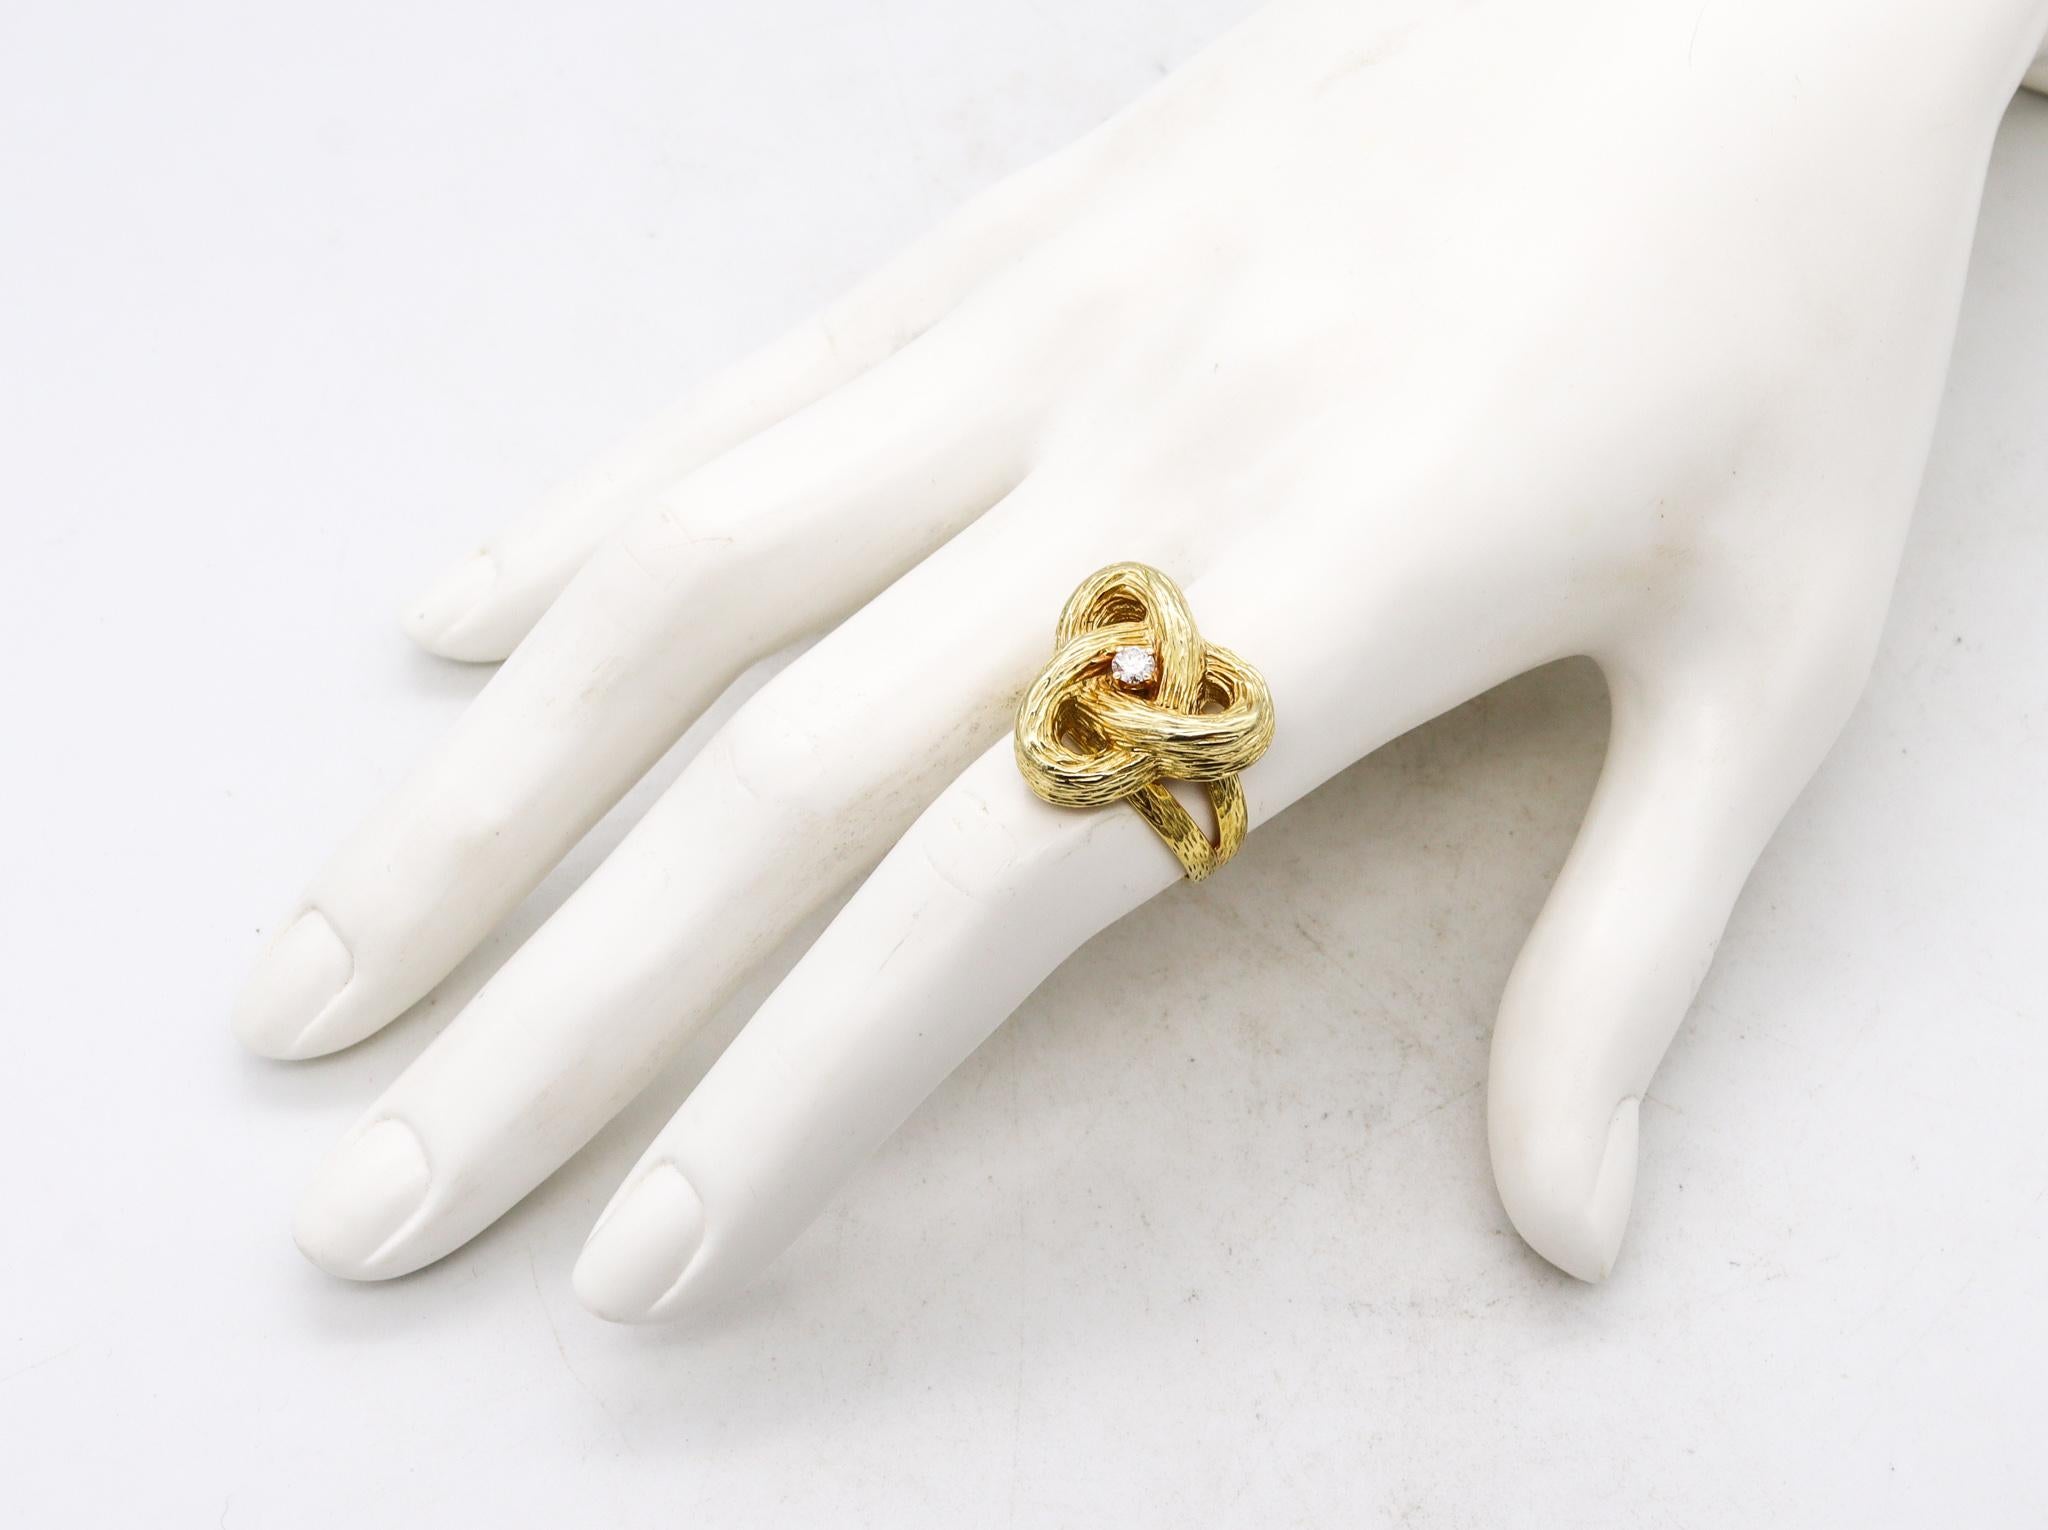 A Celtic ring designed by Cartier.

Very interesting piece created by the house of Cartier during the Spazialism period, circa1960's. It was carefully crafted in solid yellow gold of 18 karats, with textured finish. Featuring as a main decorative